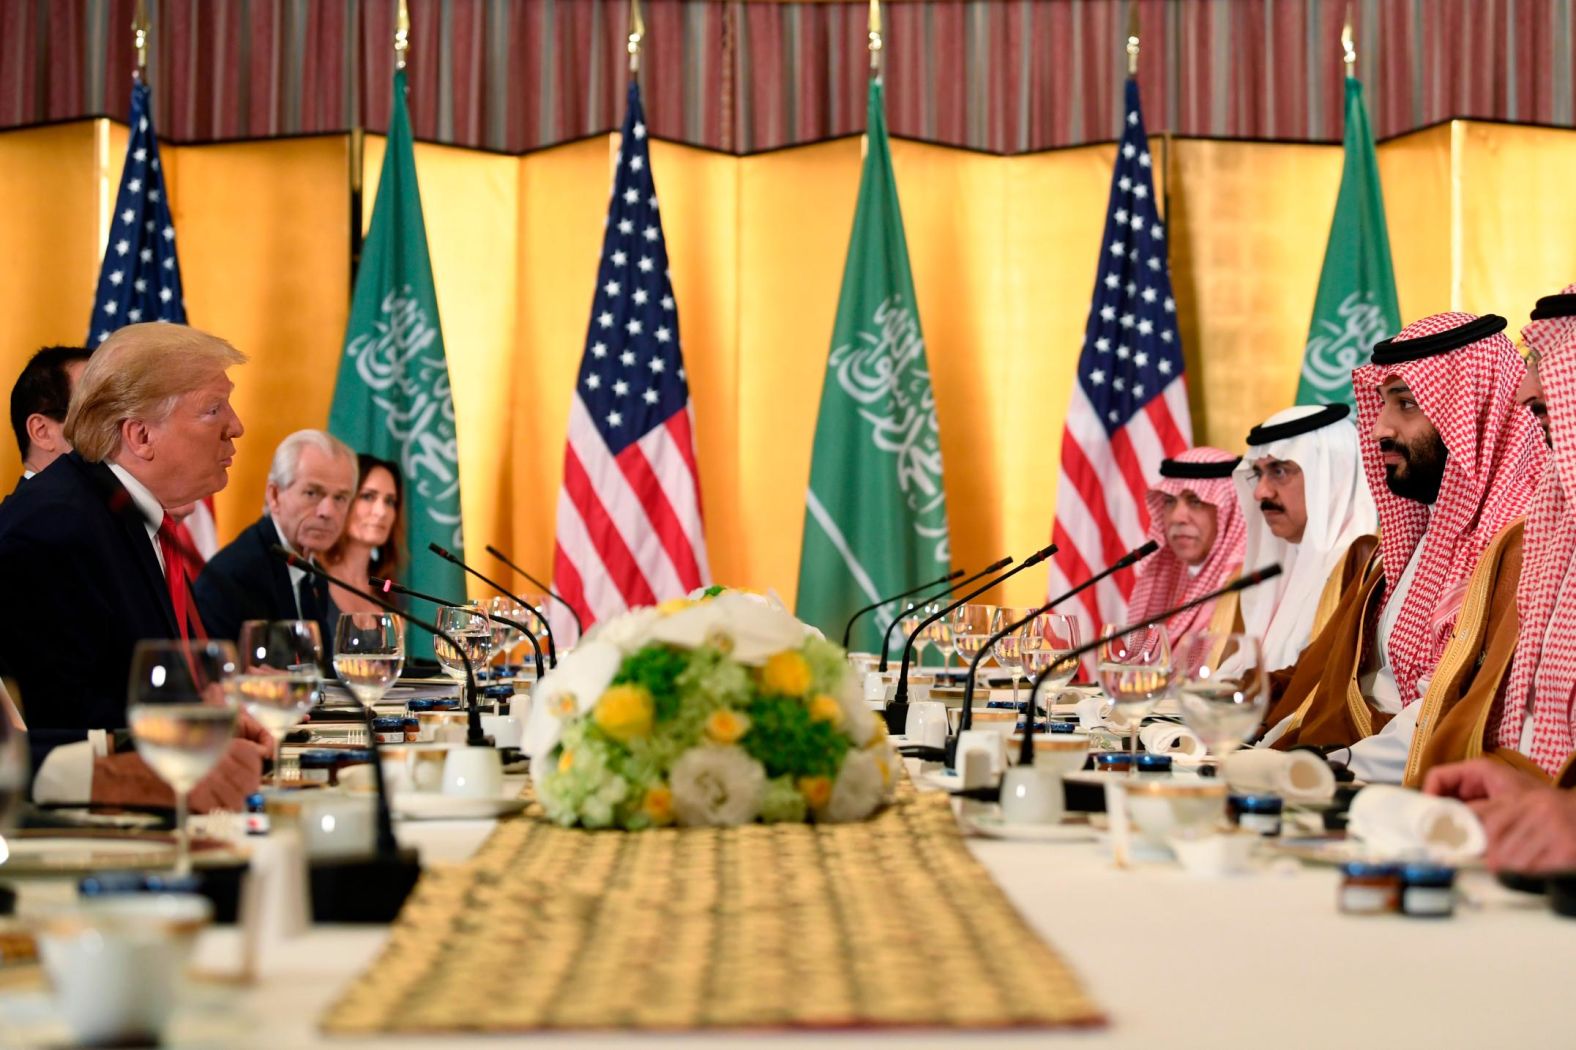 US President Donald Trump meets with Saudi Crown Prince Mohammed bin Salman on Saturday during a working breakfast on the sidelines of the G20 summit.